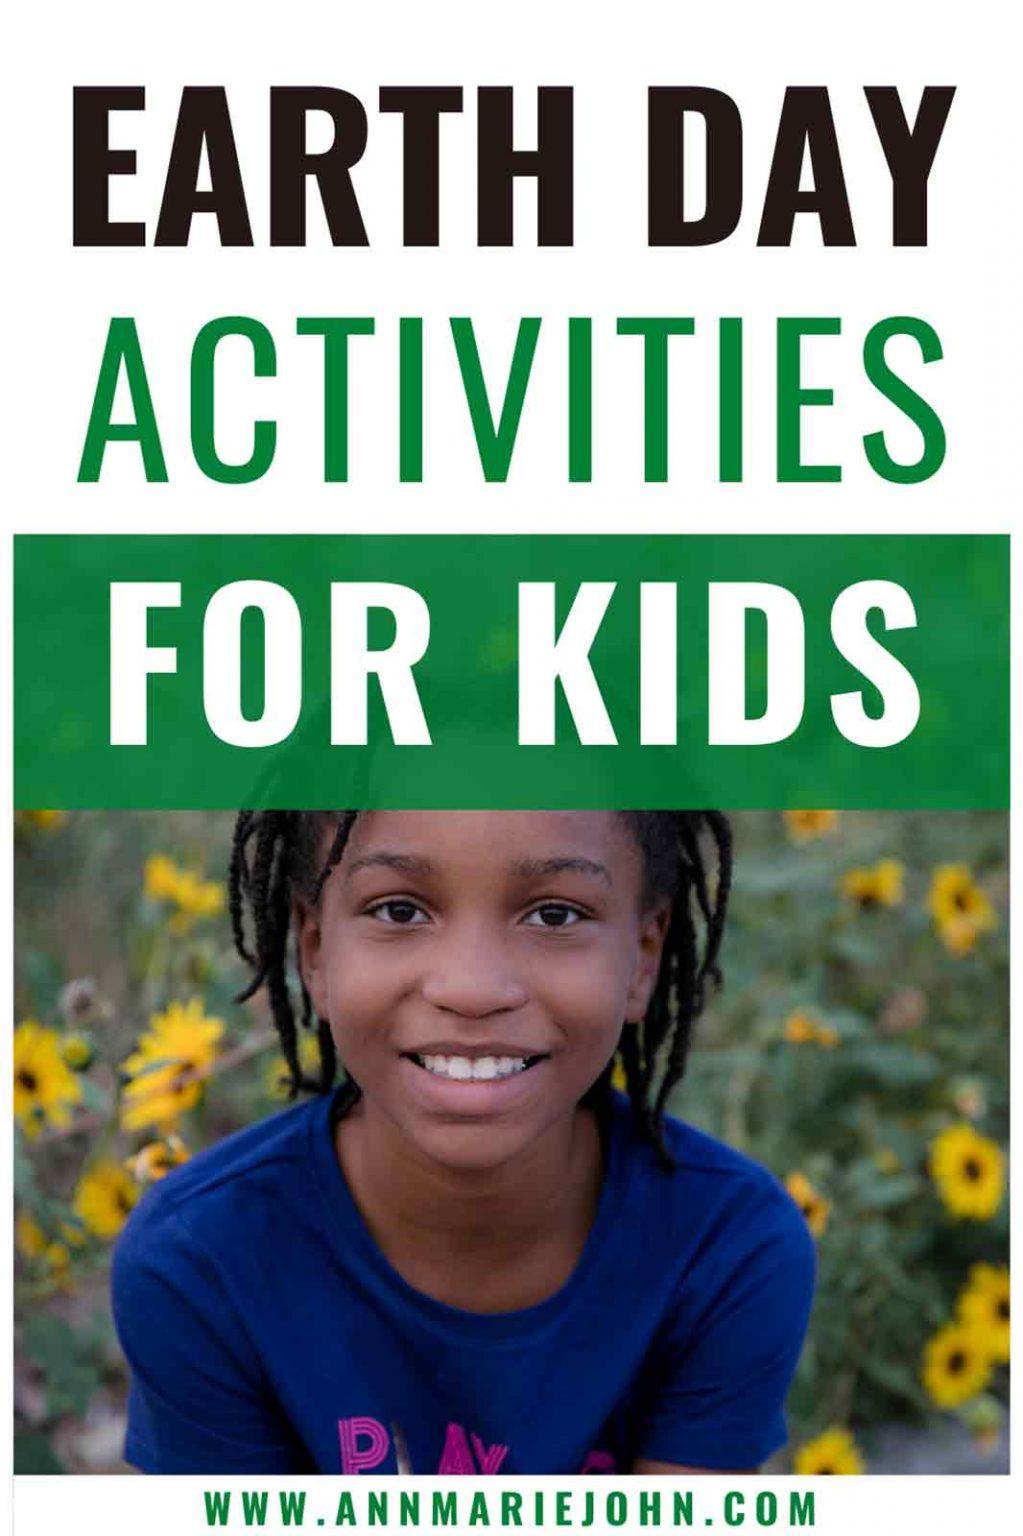 earth-day-activities-for-kids-annmarie-john